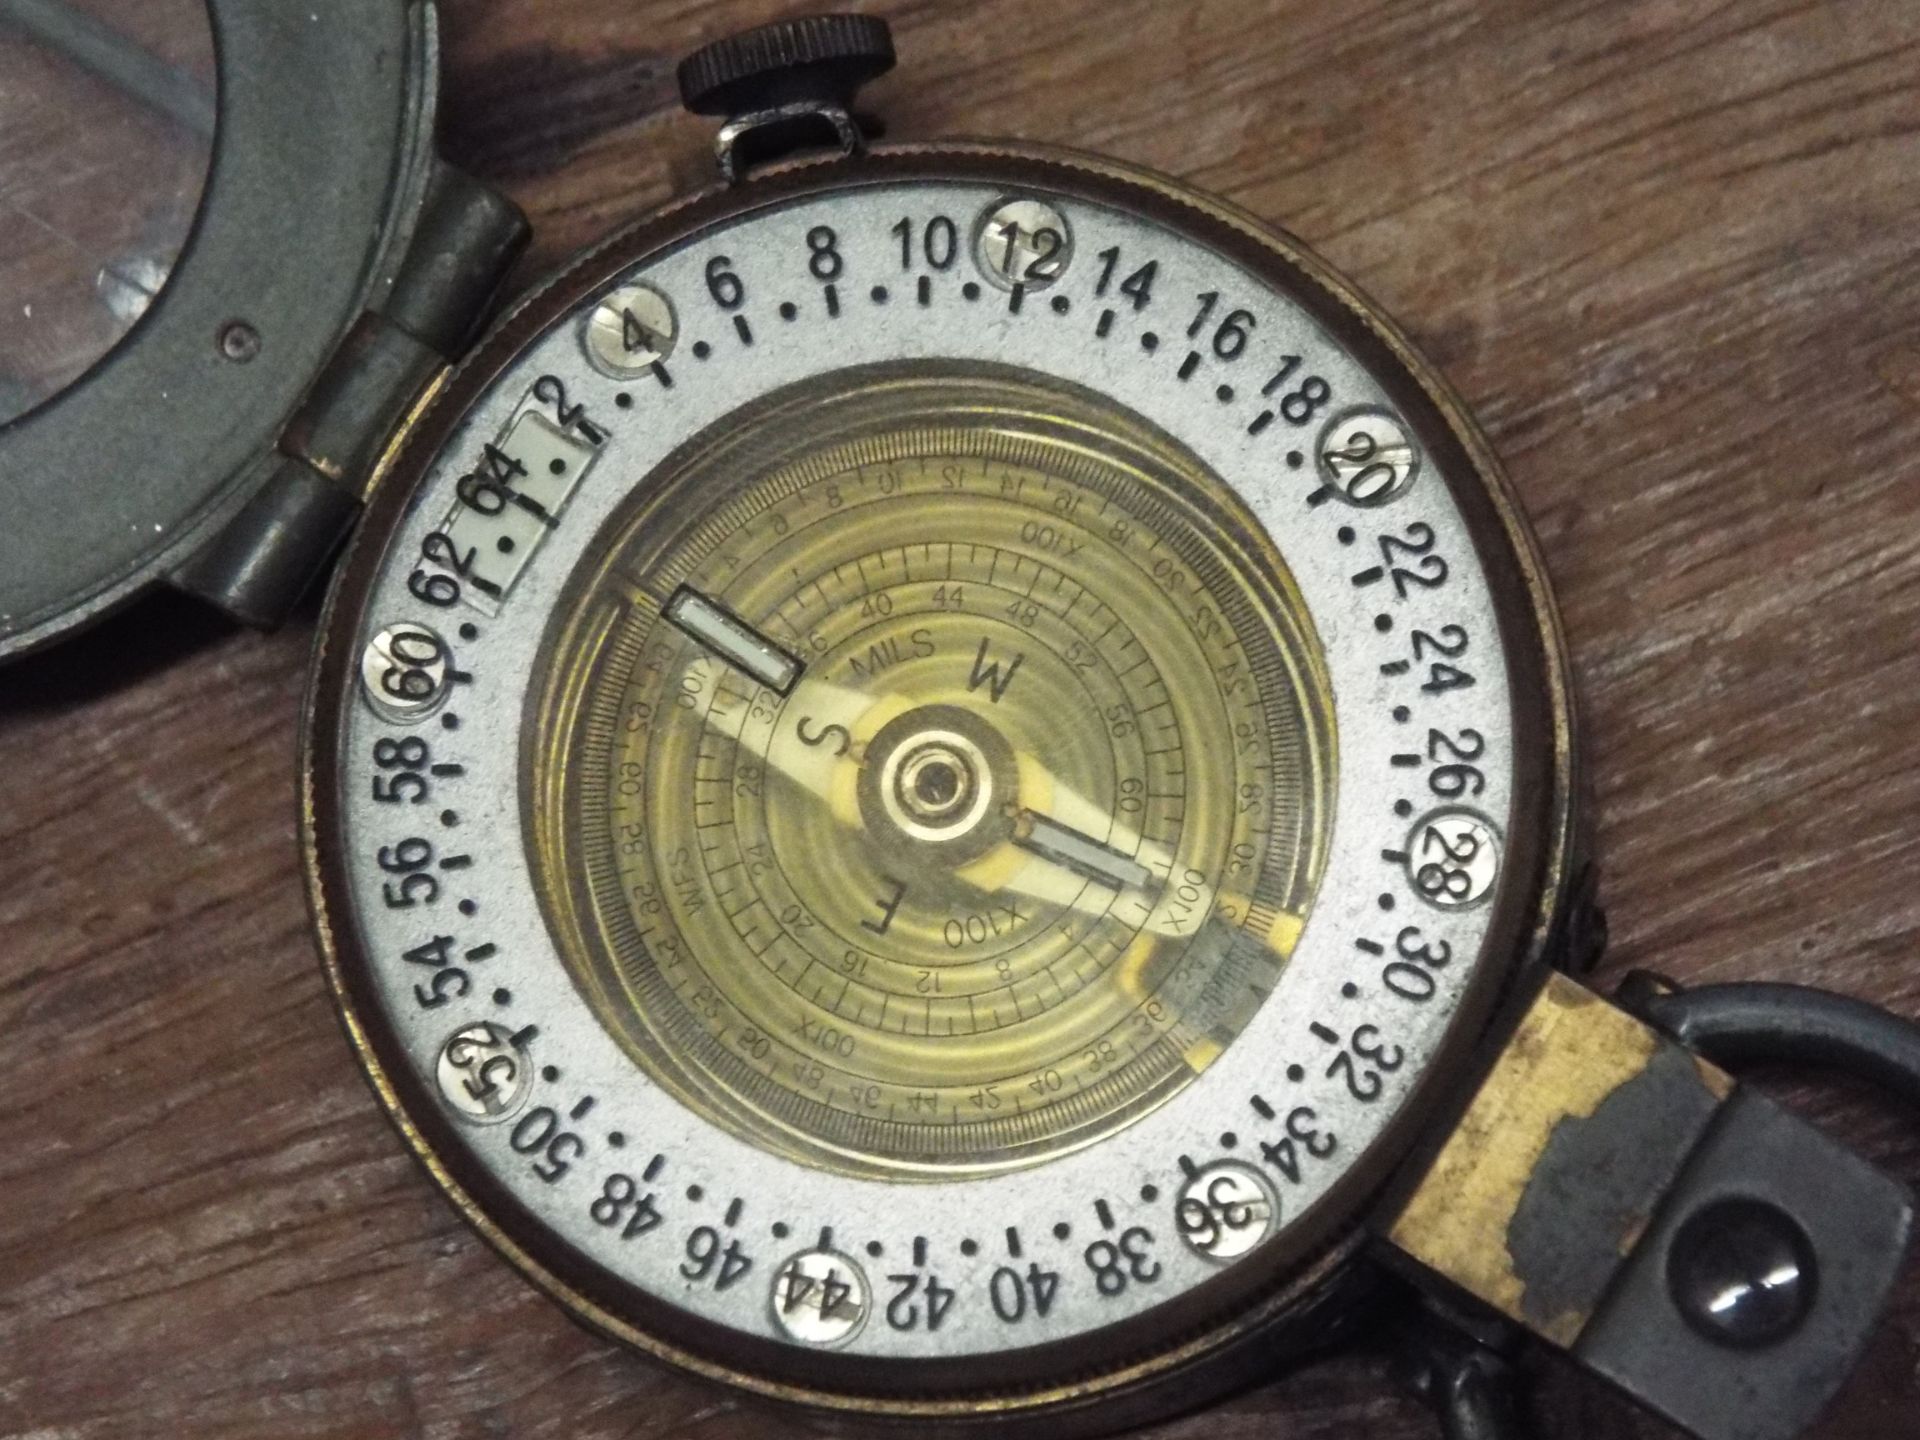 Genuine British Army Stanley Prismatic Marching Compass - Image 2 of 4